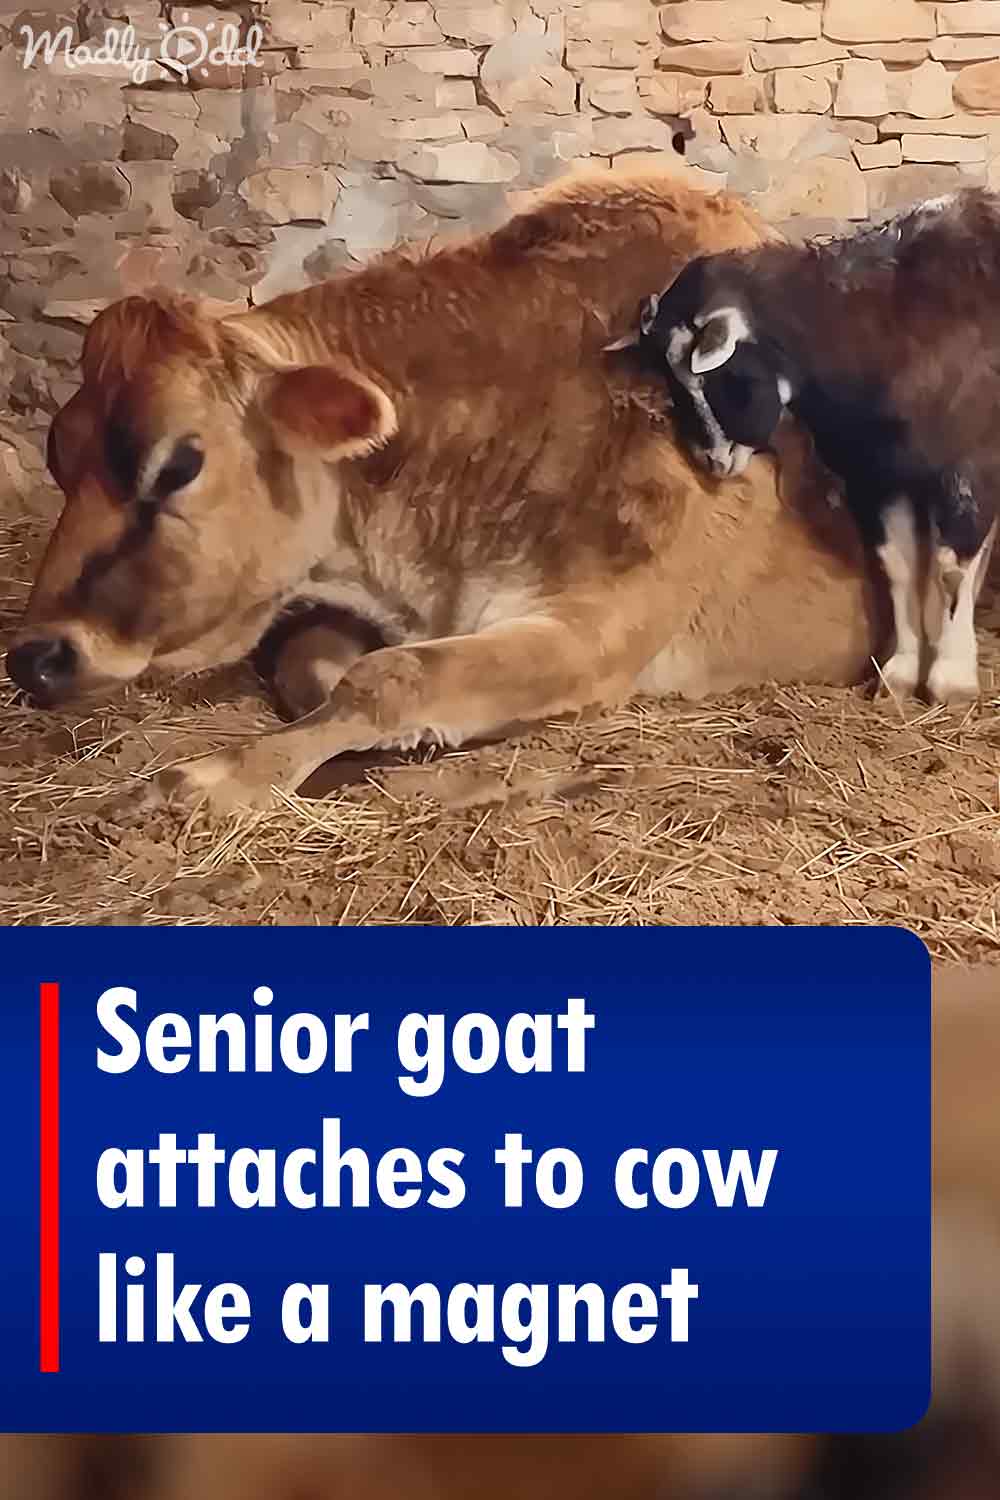 Senior goat attaches to cow like a magnet